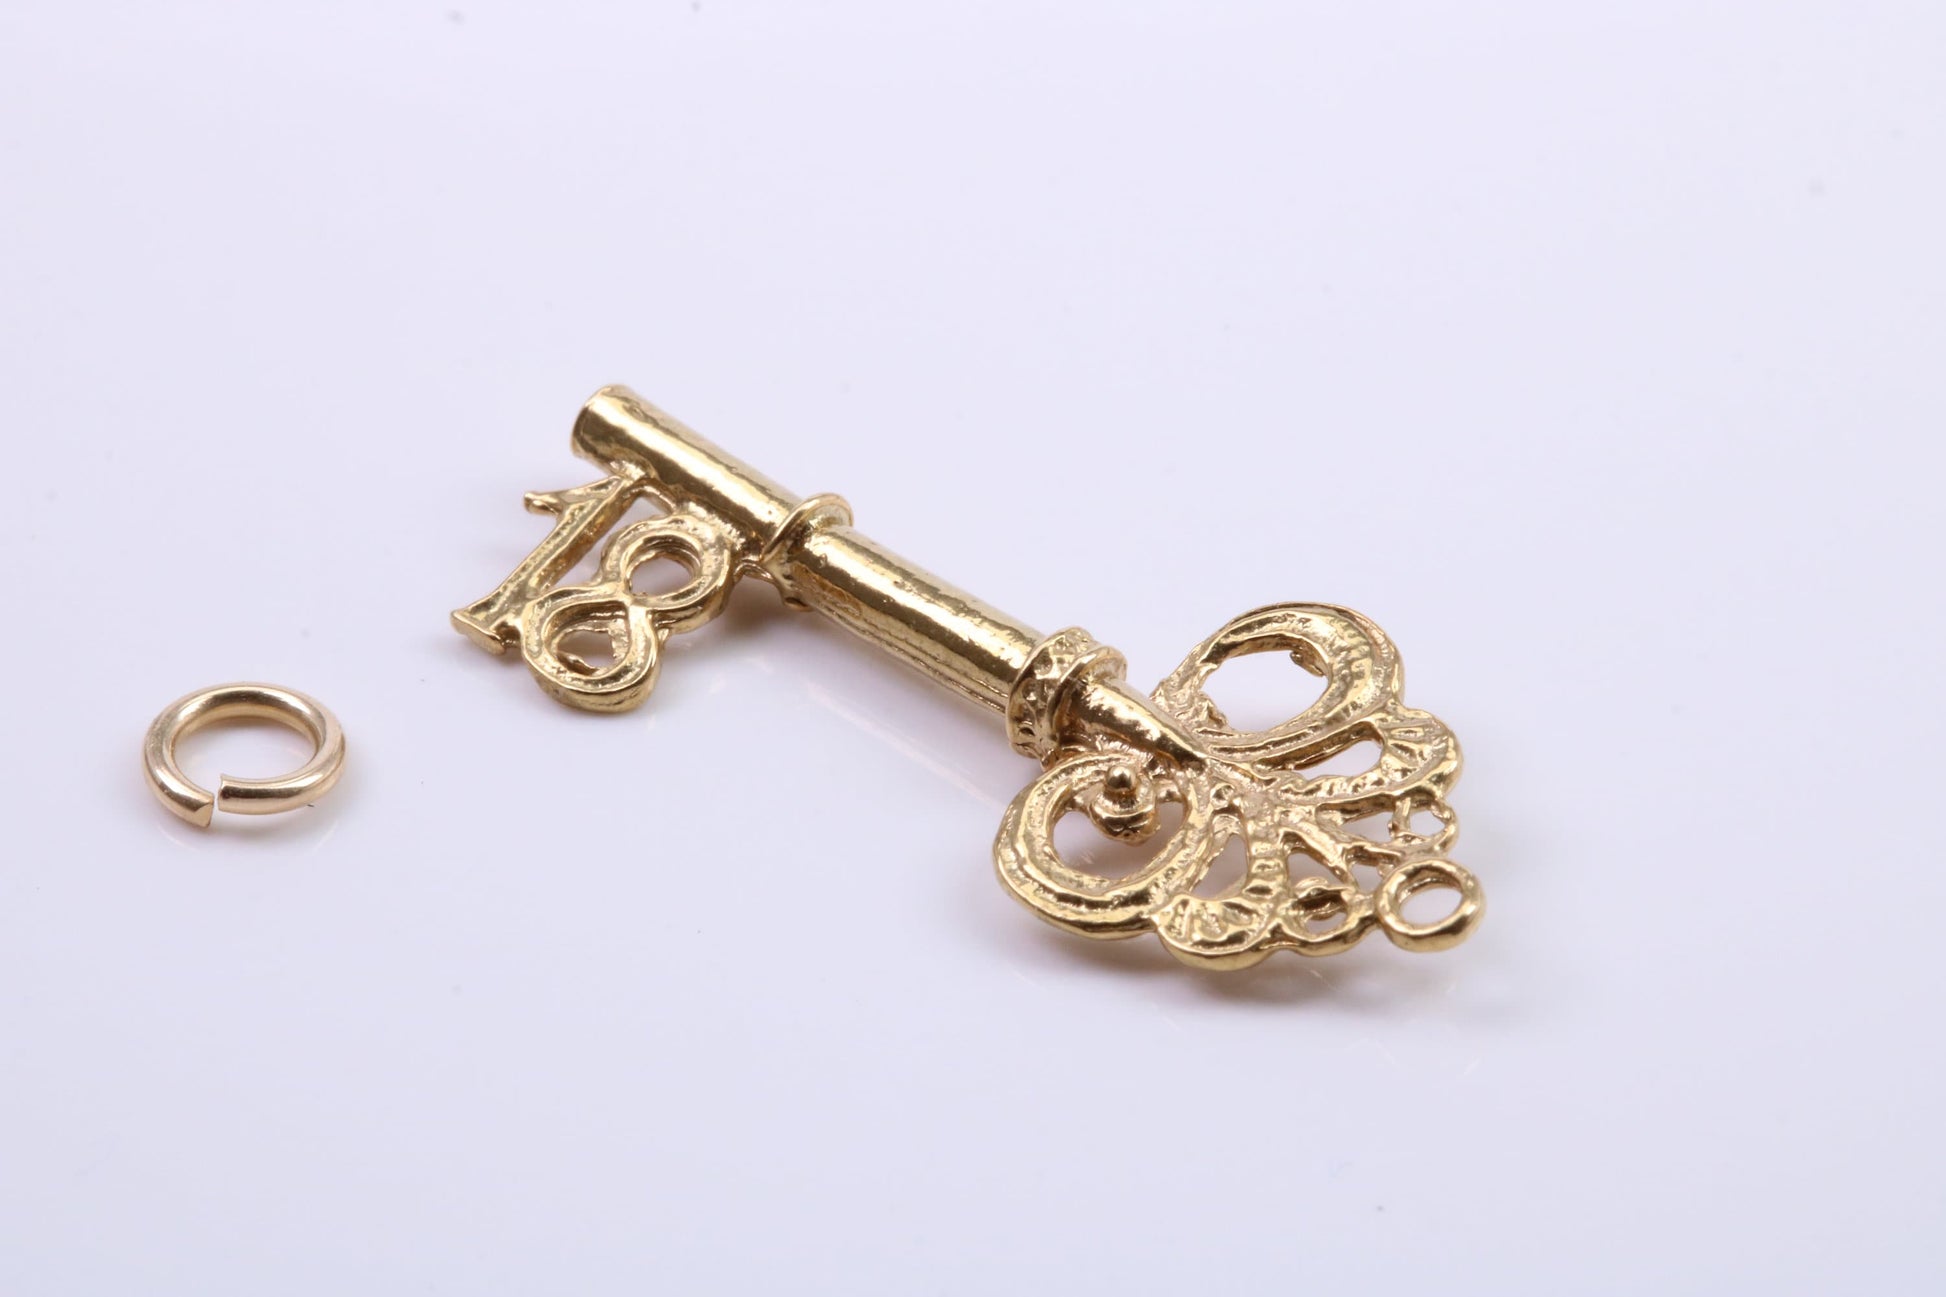 18th Birthday Key Charm, Traditional Charm, Made from Solid Yellow Gold, British Hallmarked, Complete with Attachment Link